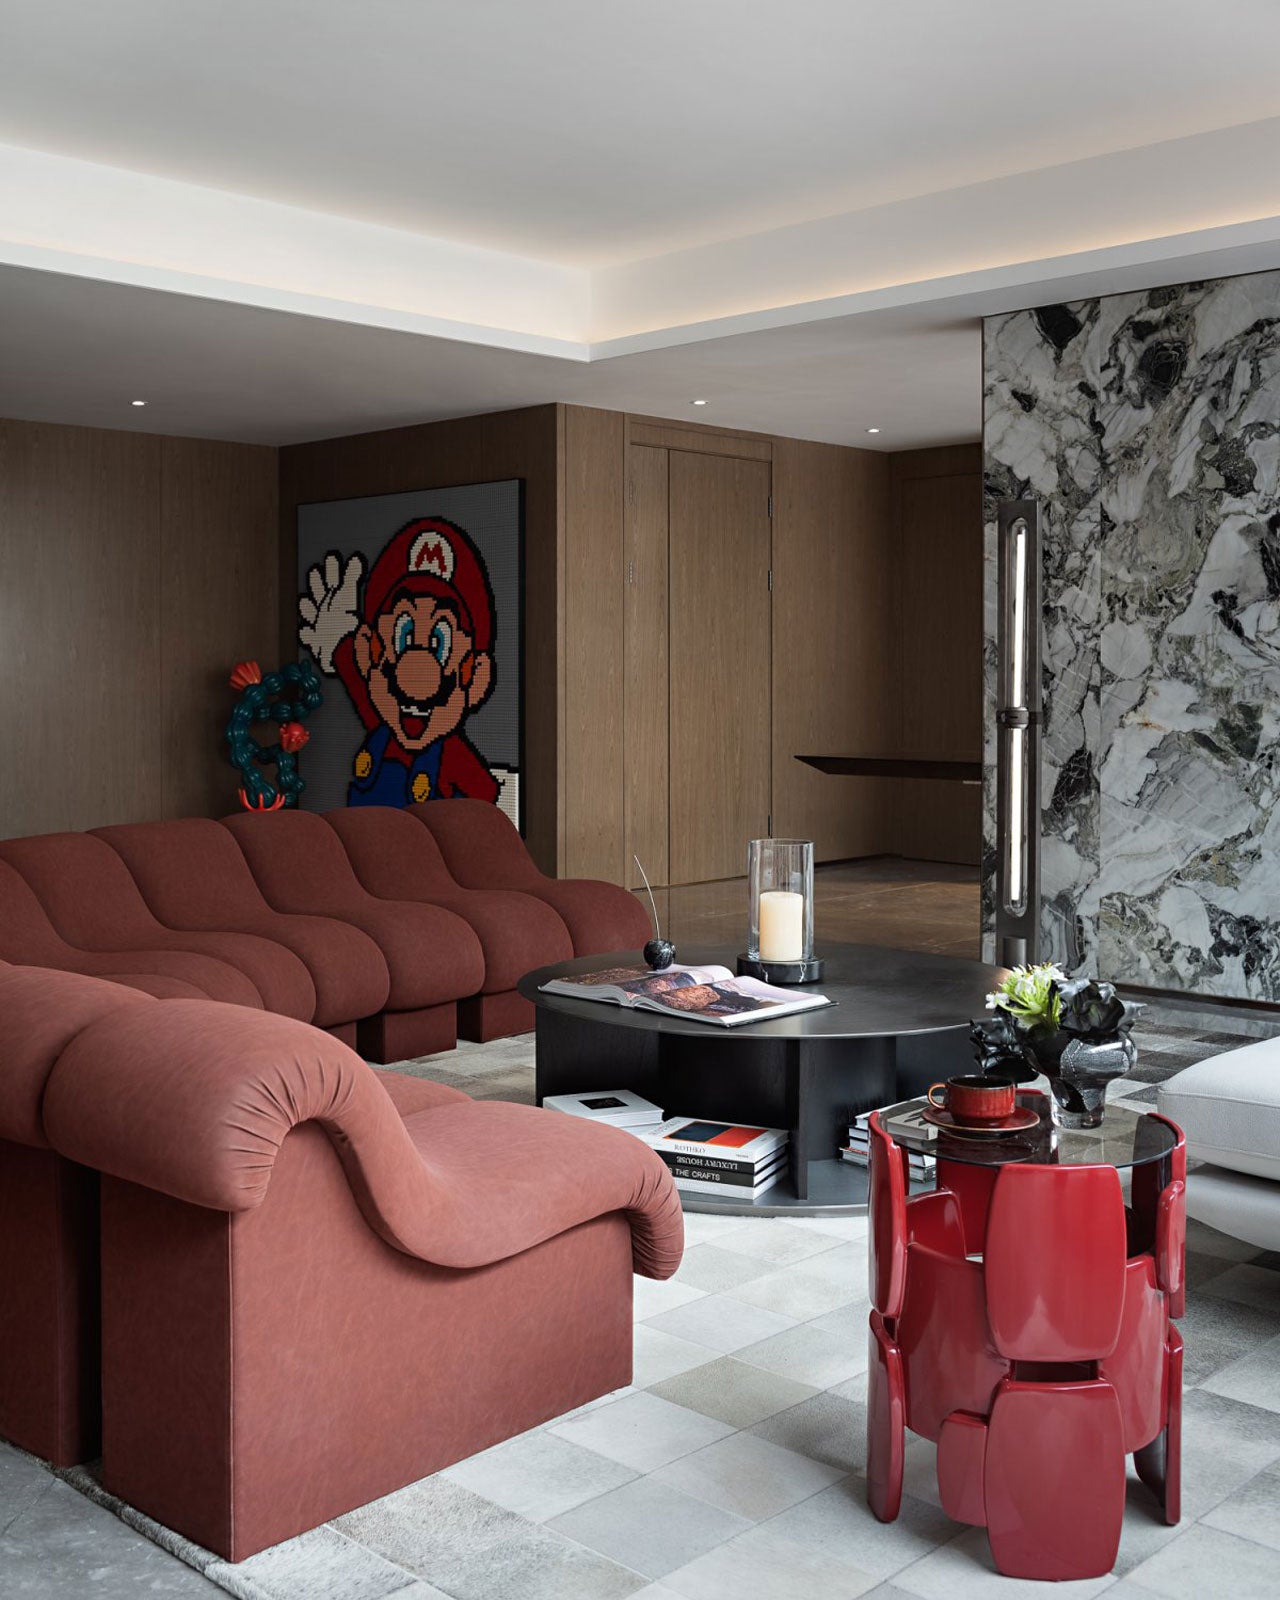 The Bold Charm of a Red Fabric Curved Sofa in Modern Home Design